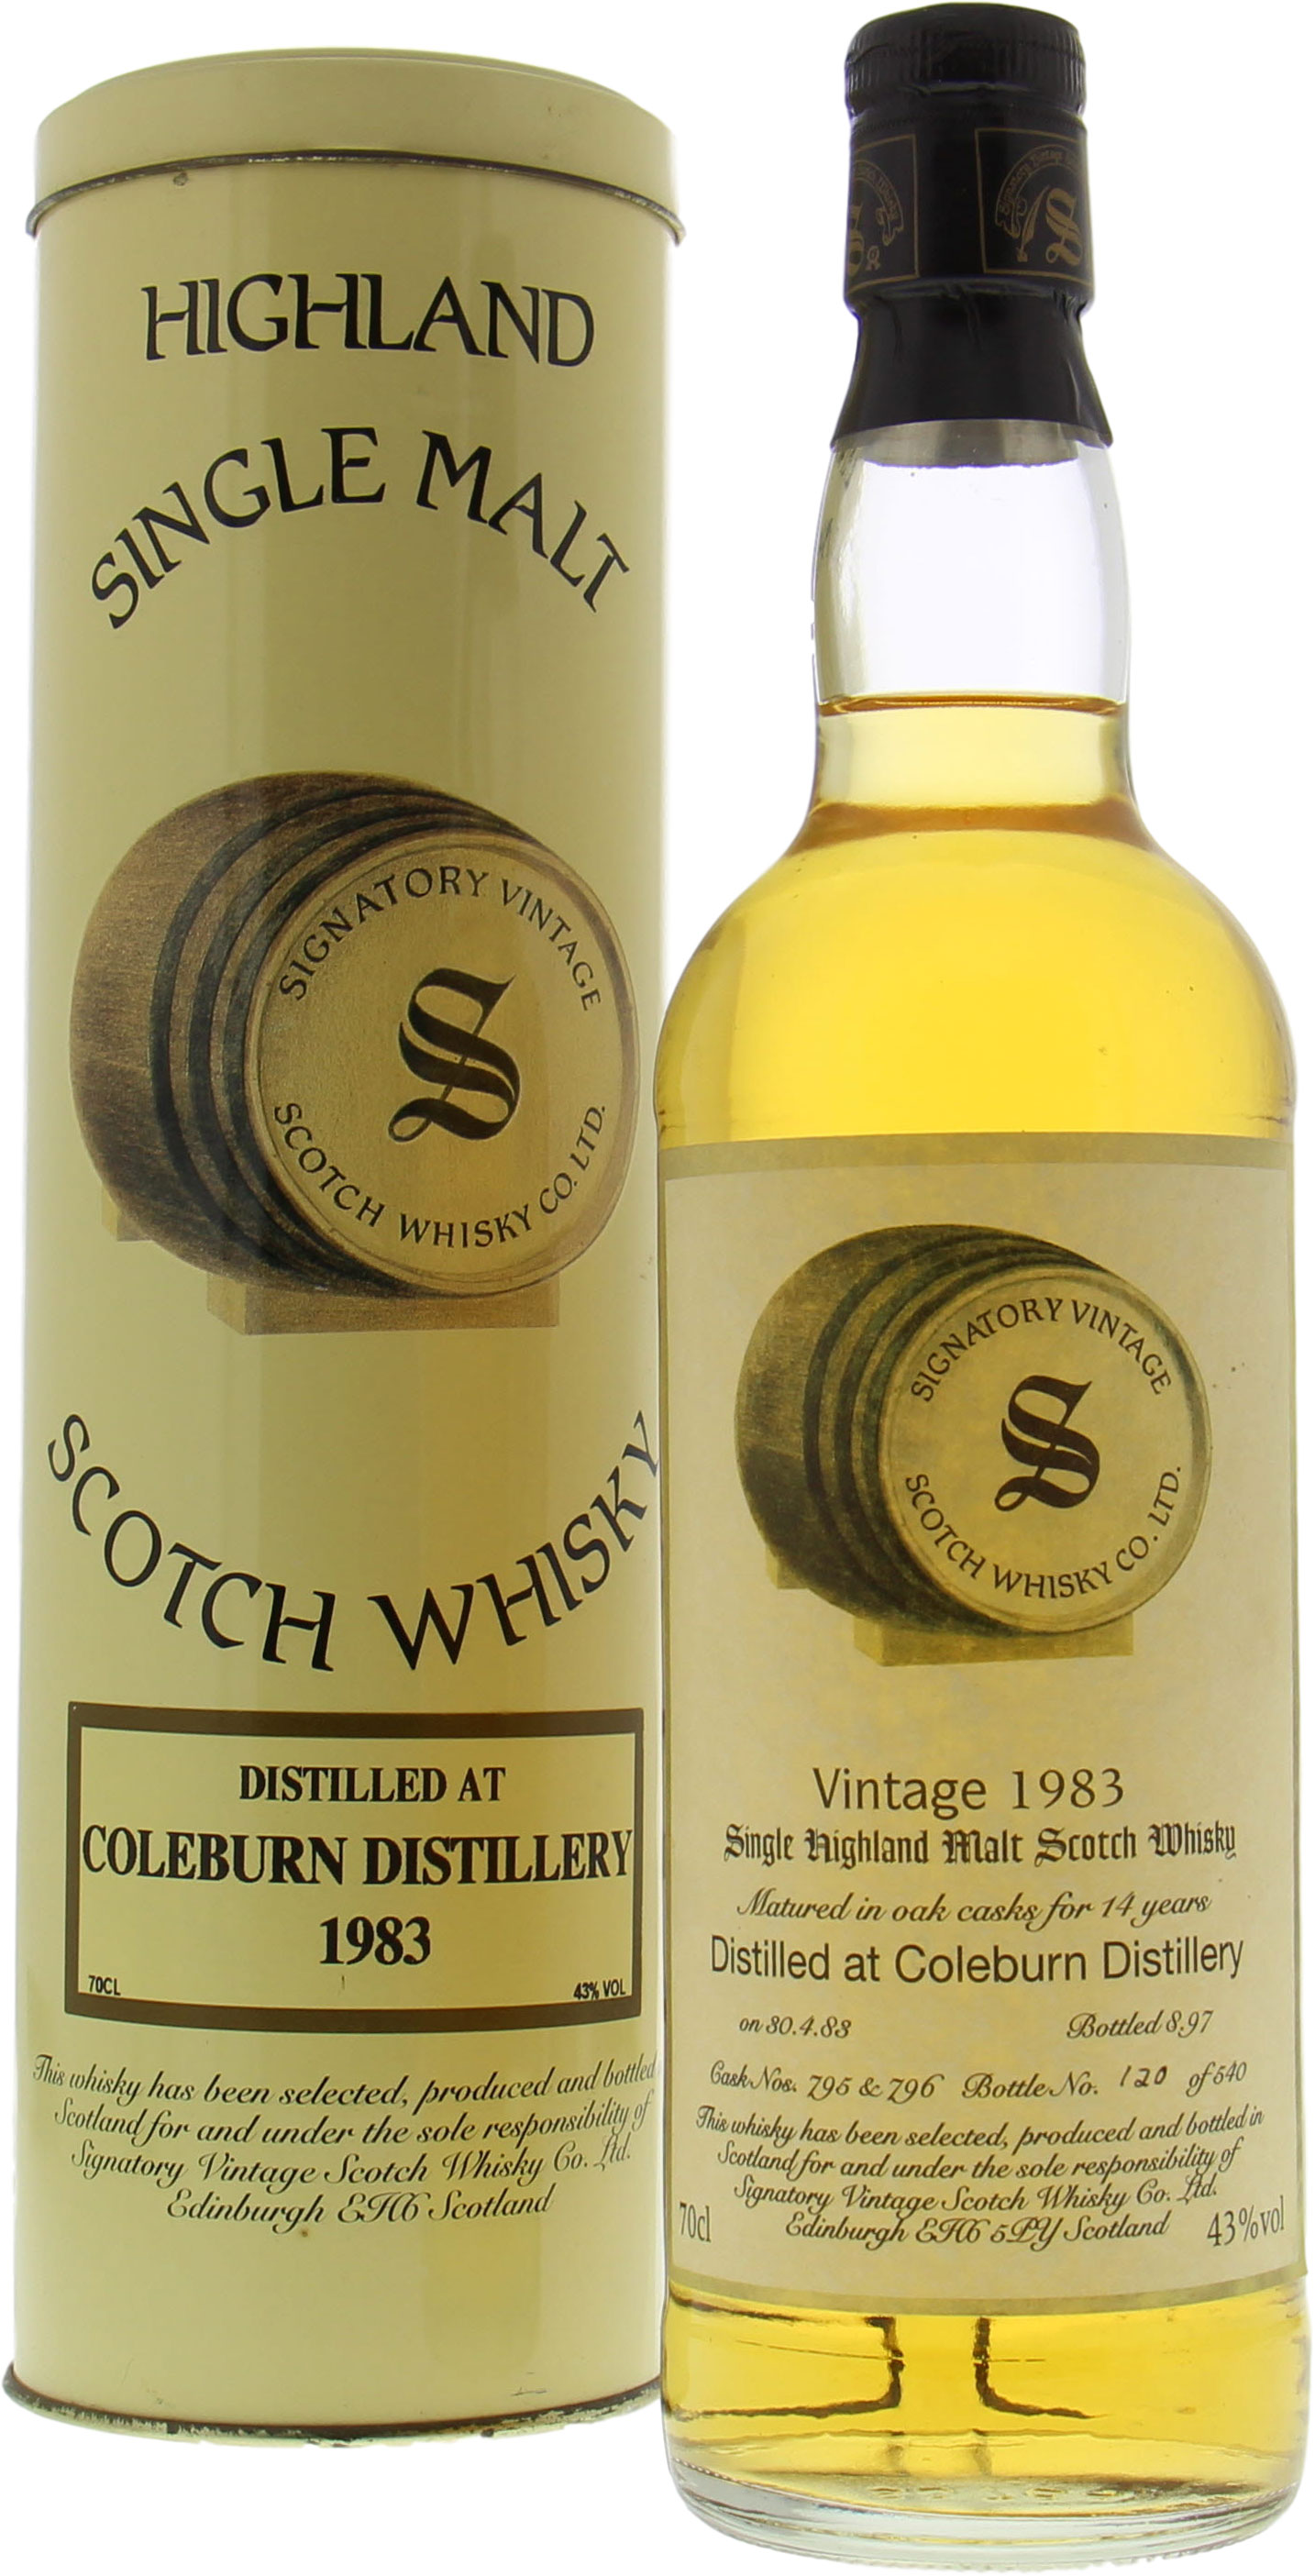 Coleburn - 14 years Old Signatory Vintage Cask 795+796 43% 1983 In Original Container